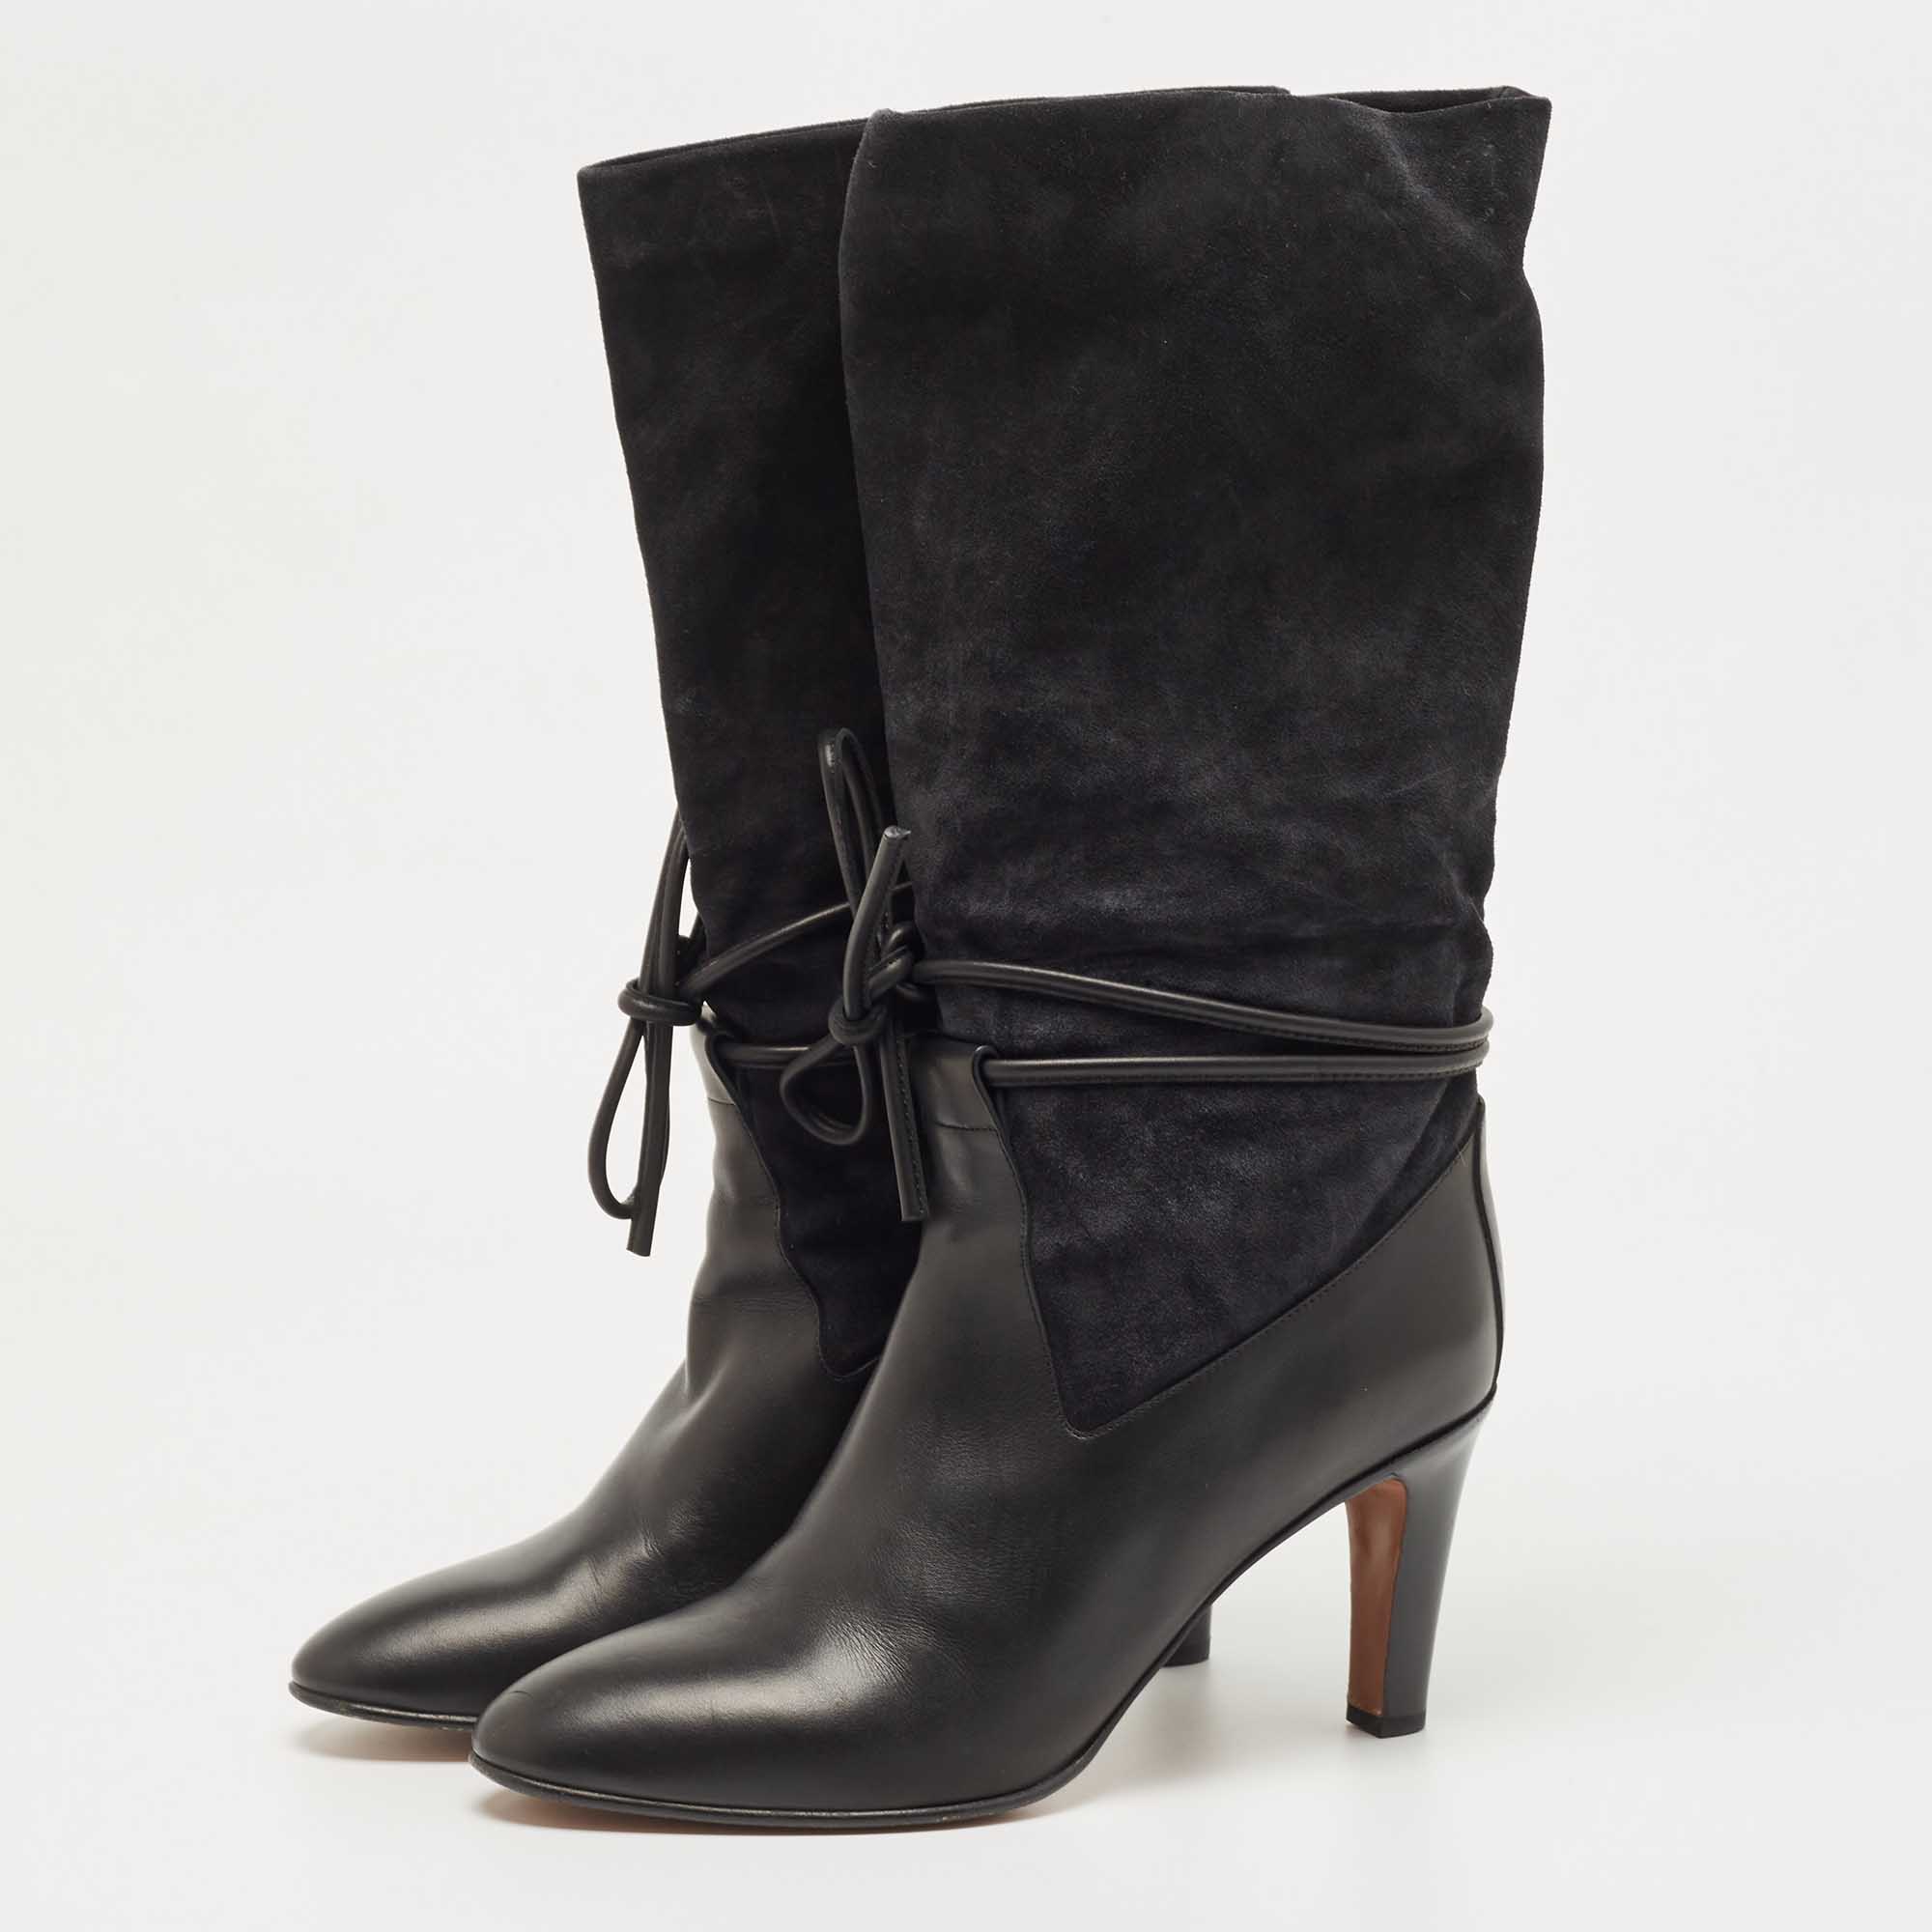 

Chloe Black Suede and Leather Tie Mild Calf Boots Size